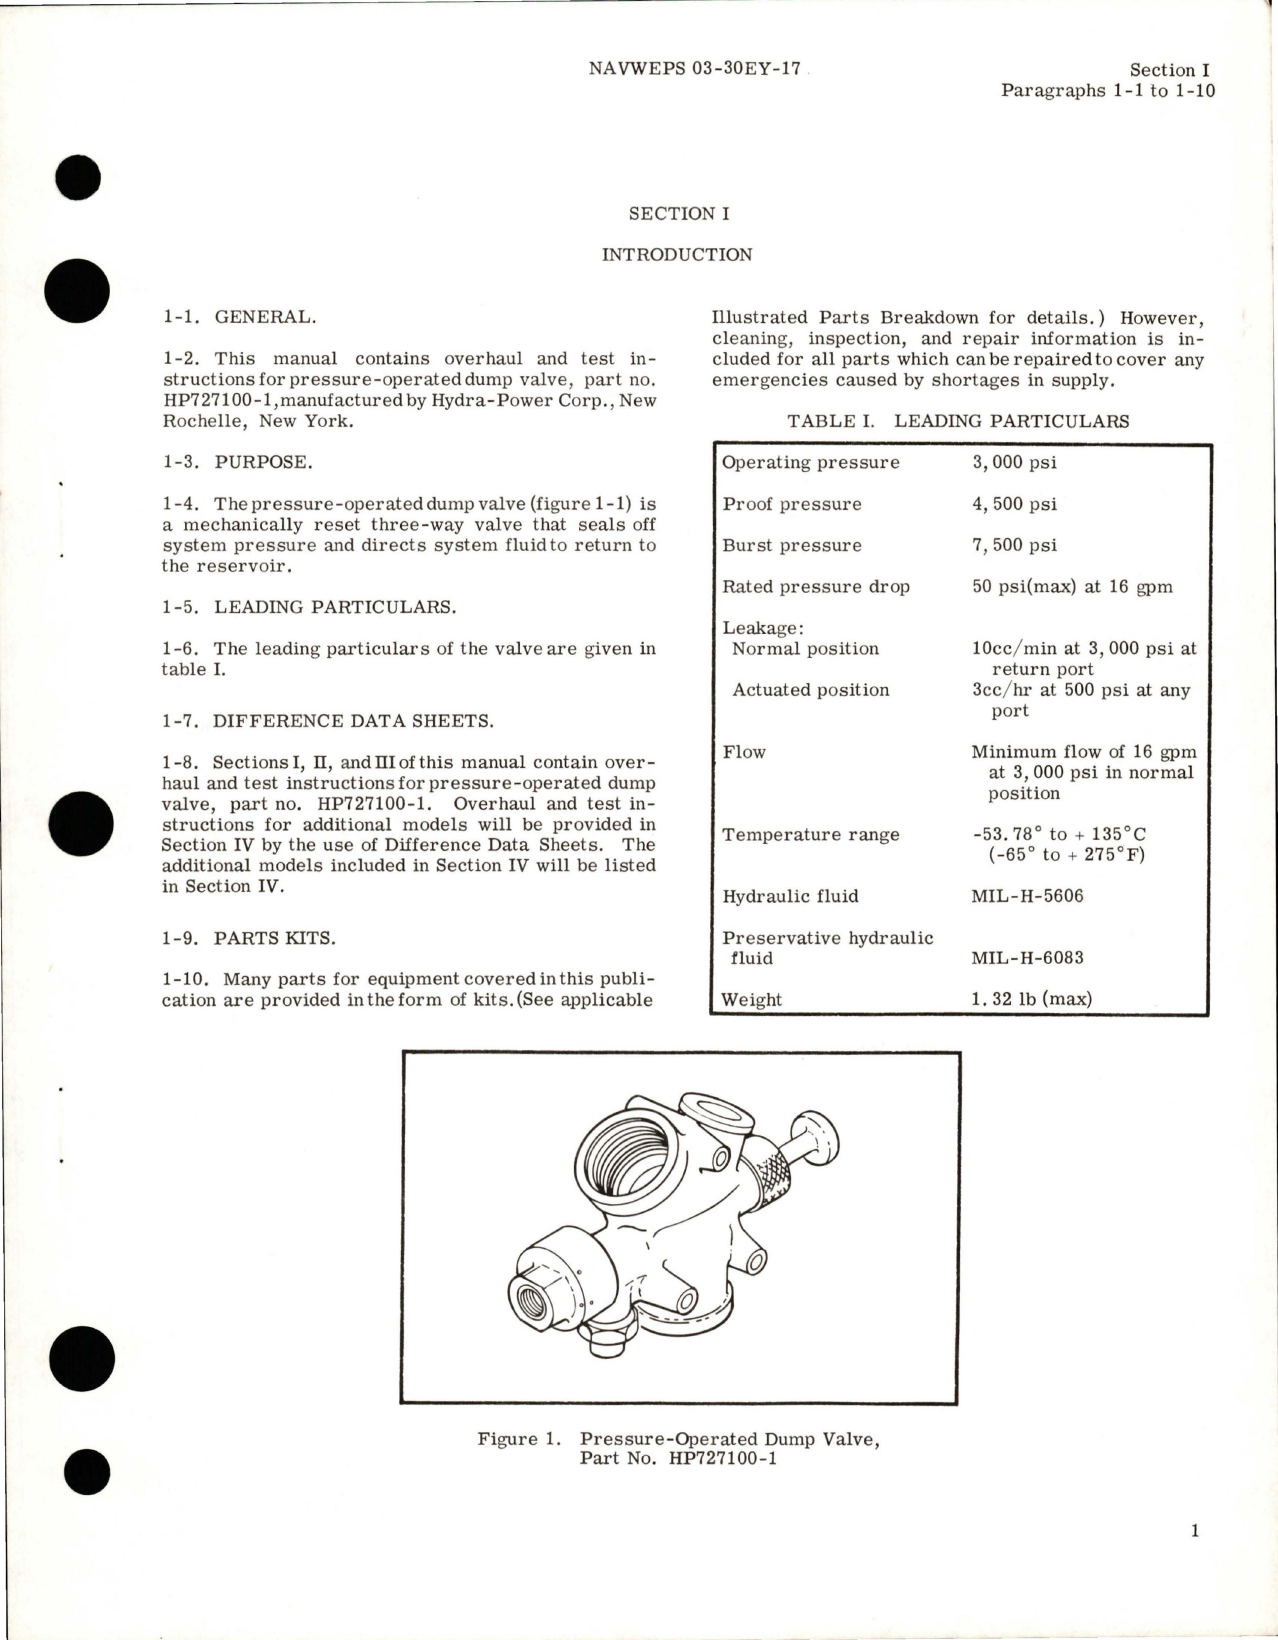 Sample page 5 from AirCorps Library document: Overhaul Instructions for Pressure Operated Dump Valve - Part HP 727100-1